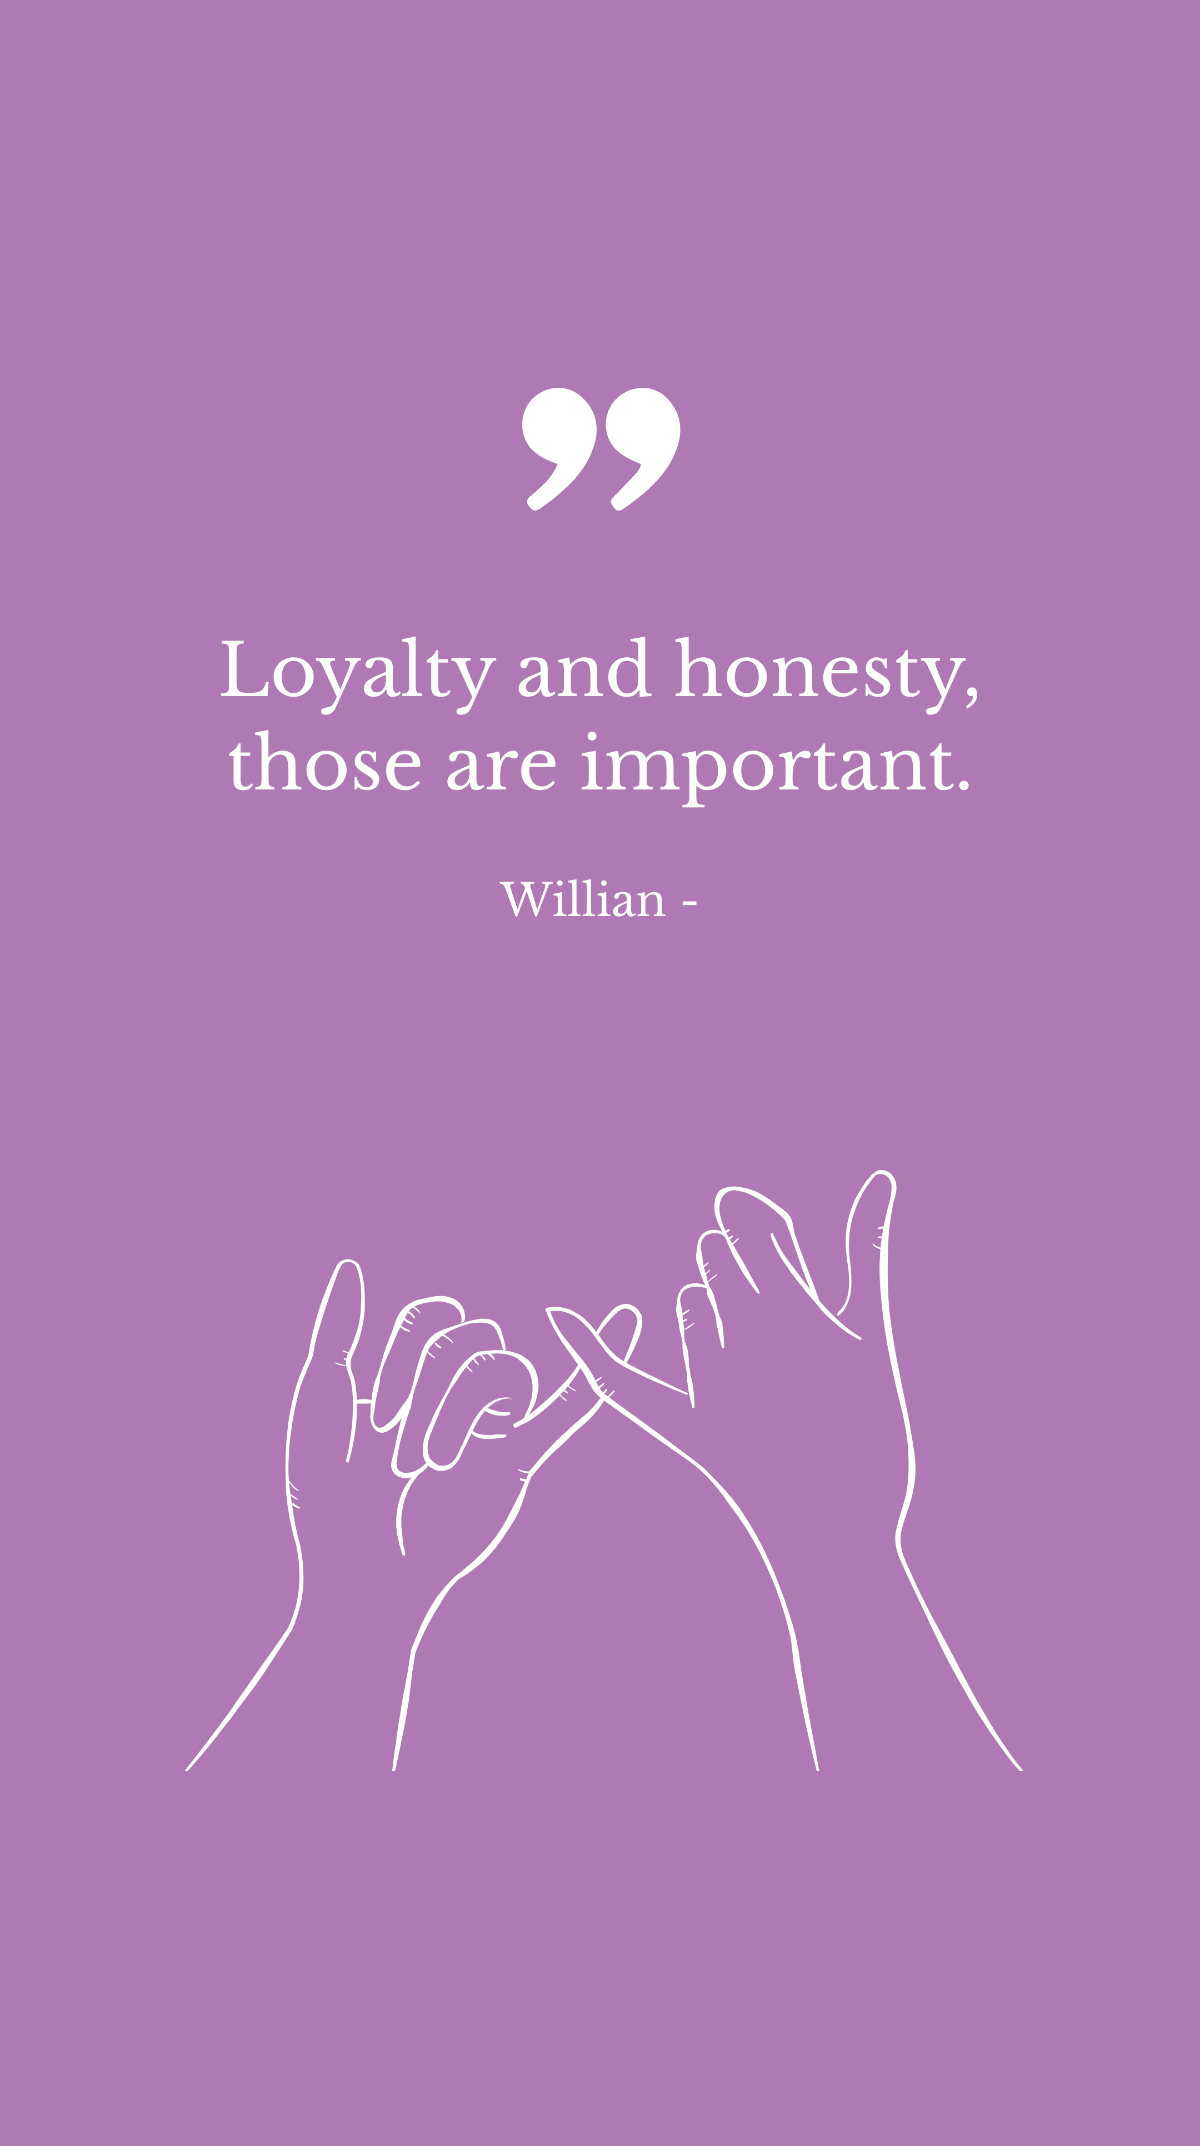 Willian - Loyalty and honesty, those are important.